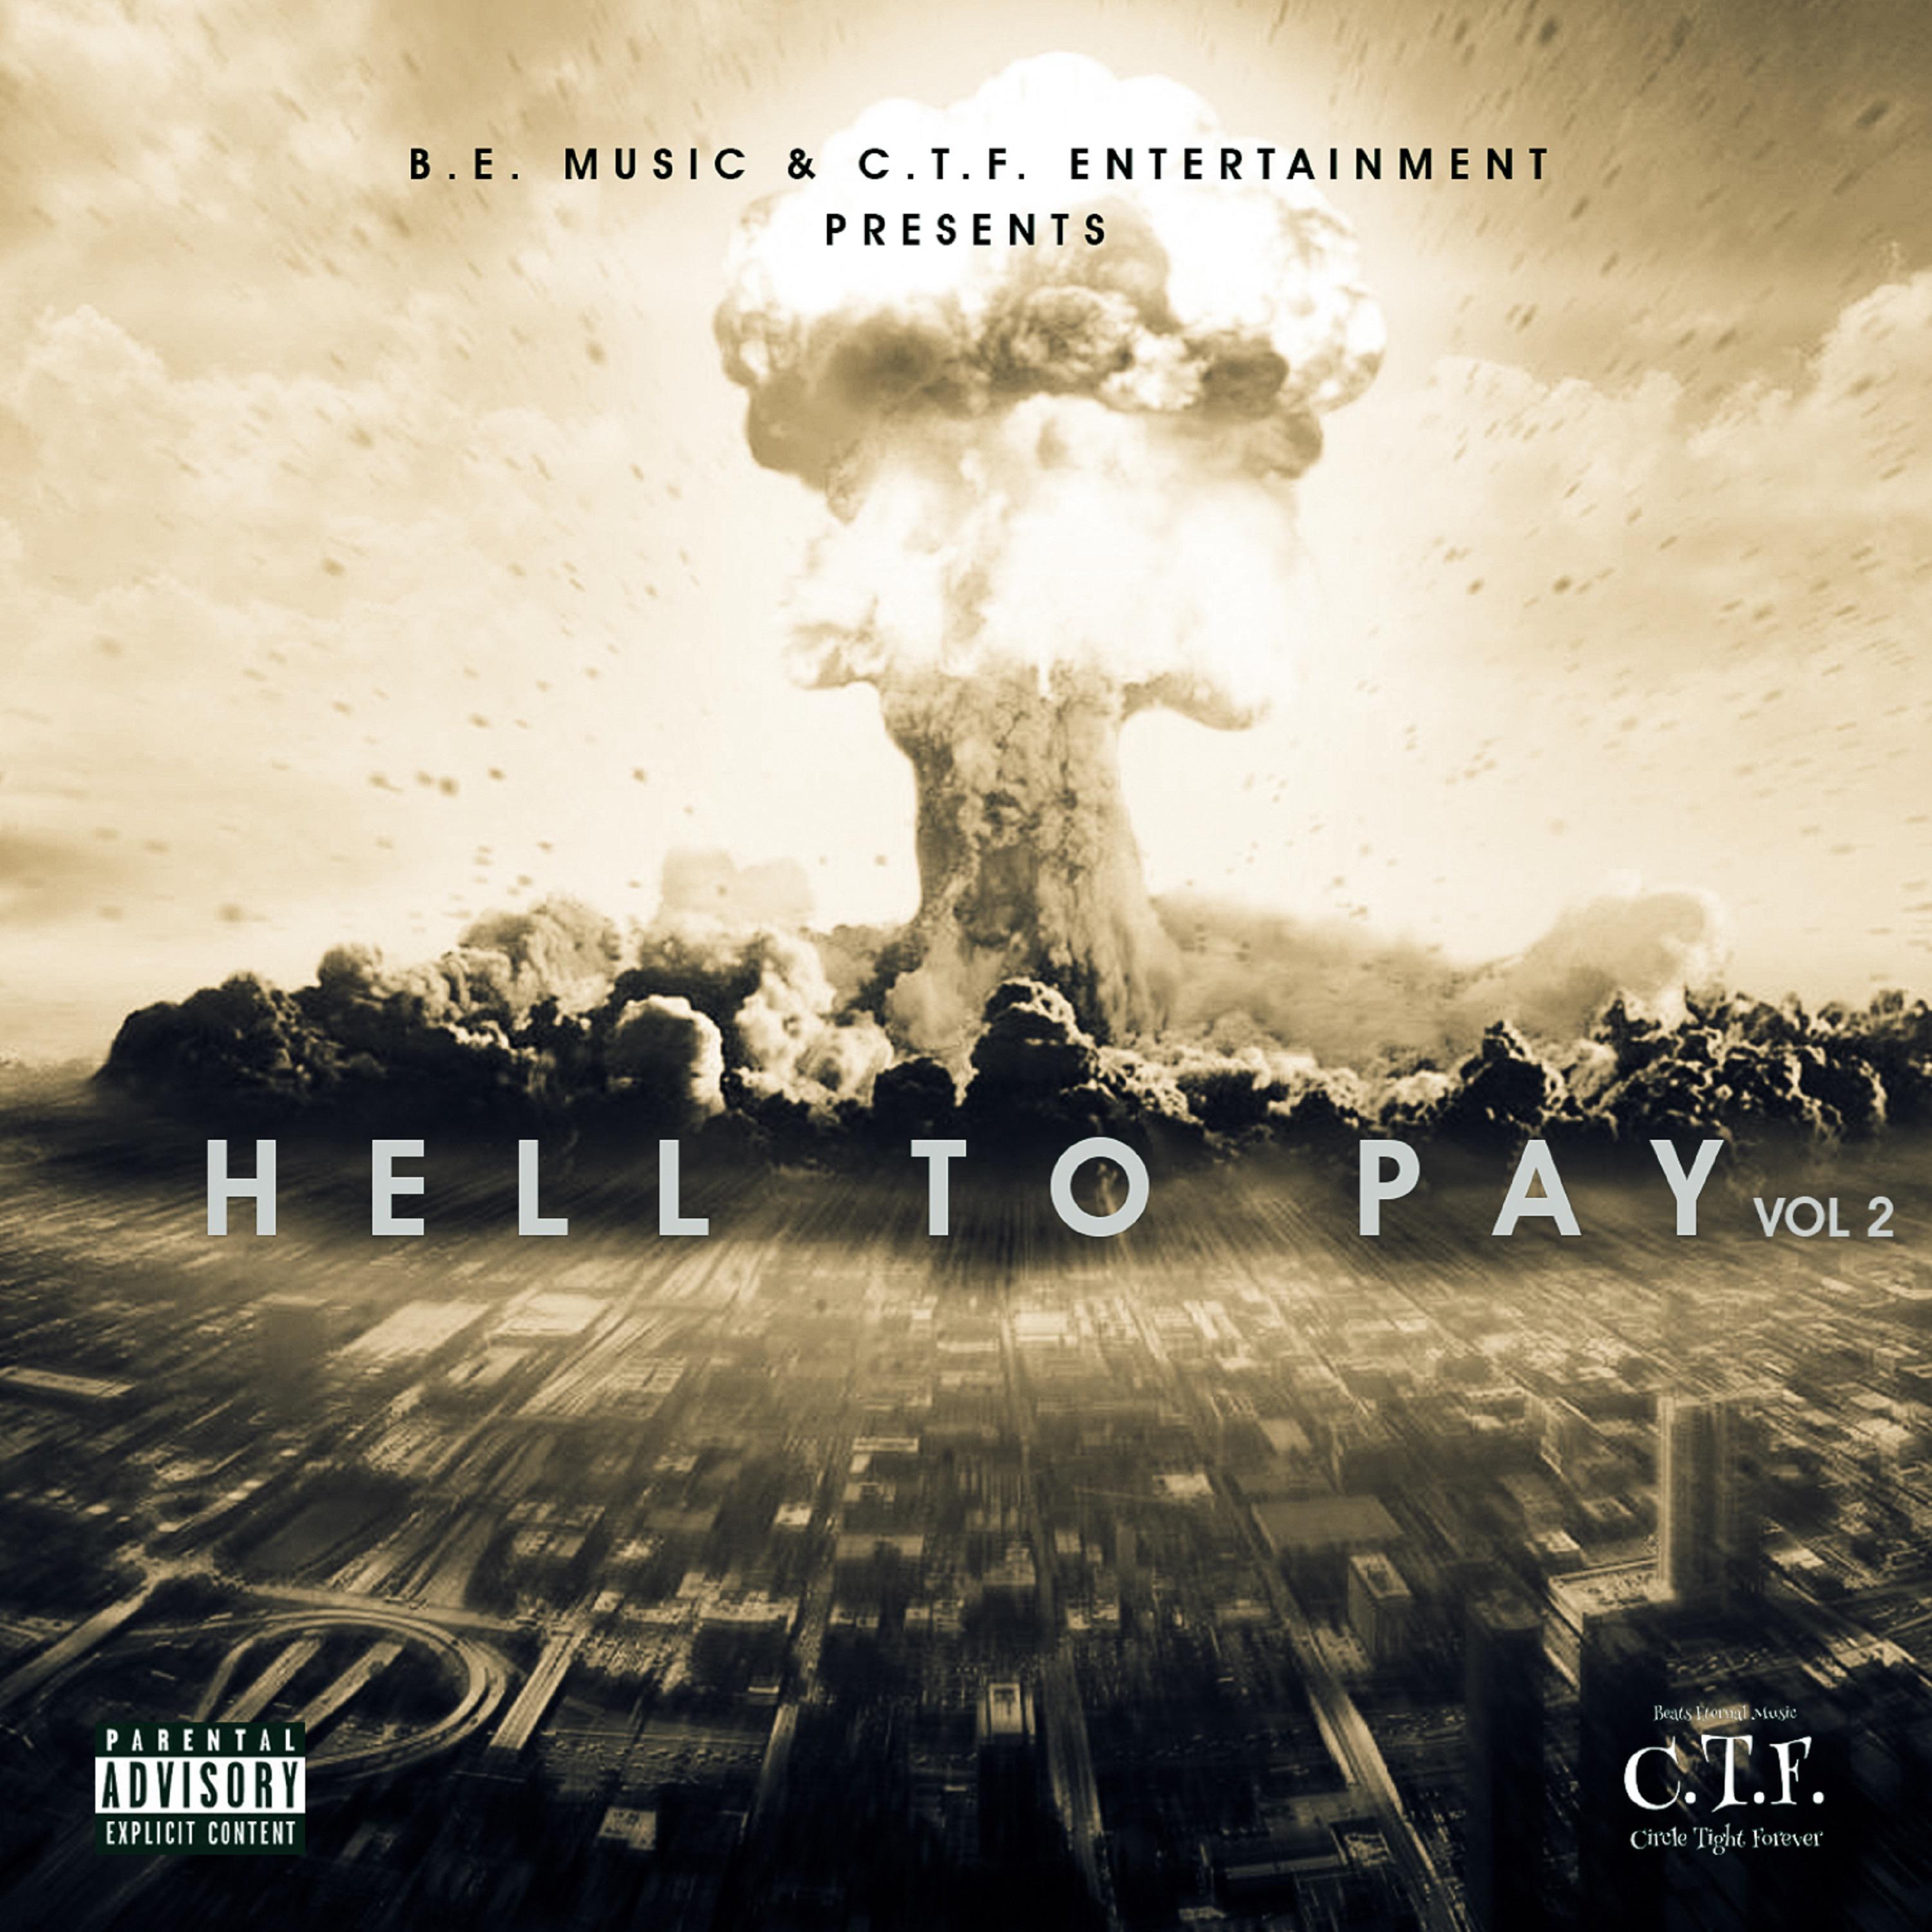 HELL TO PAY Vol.2